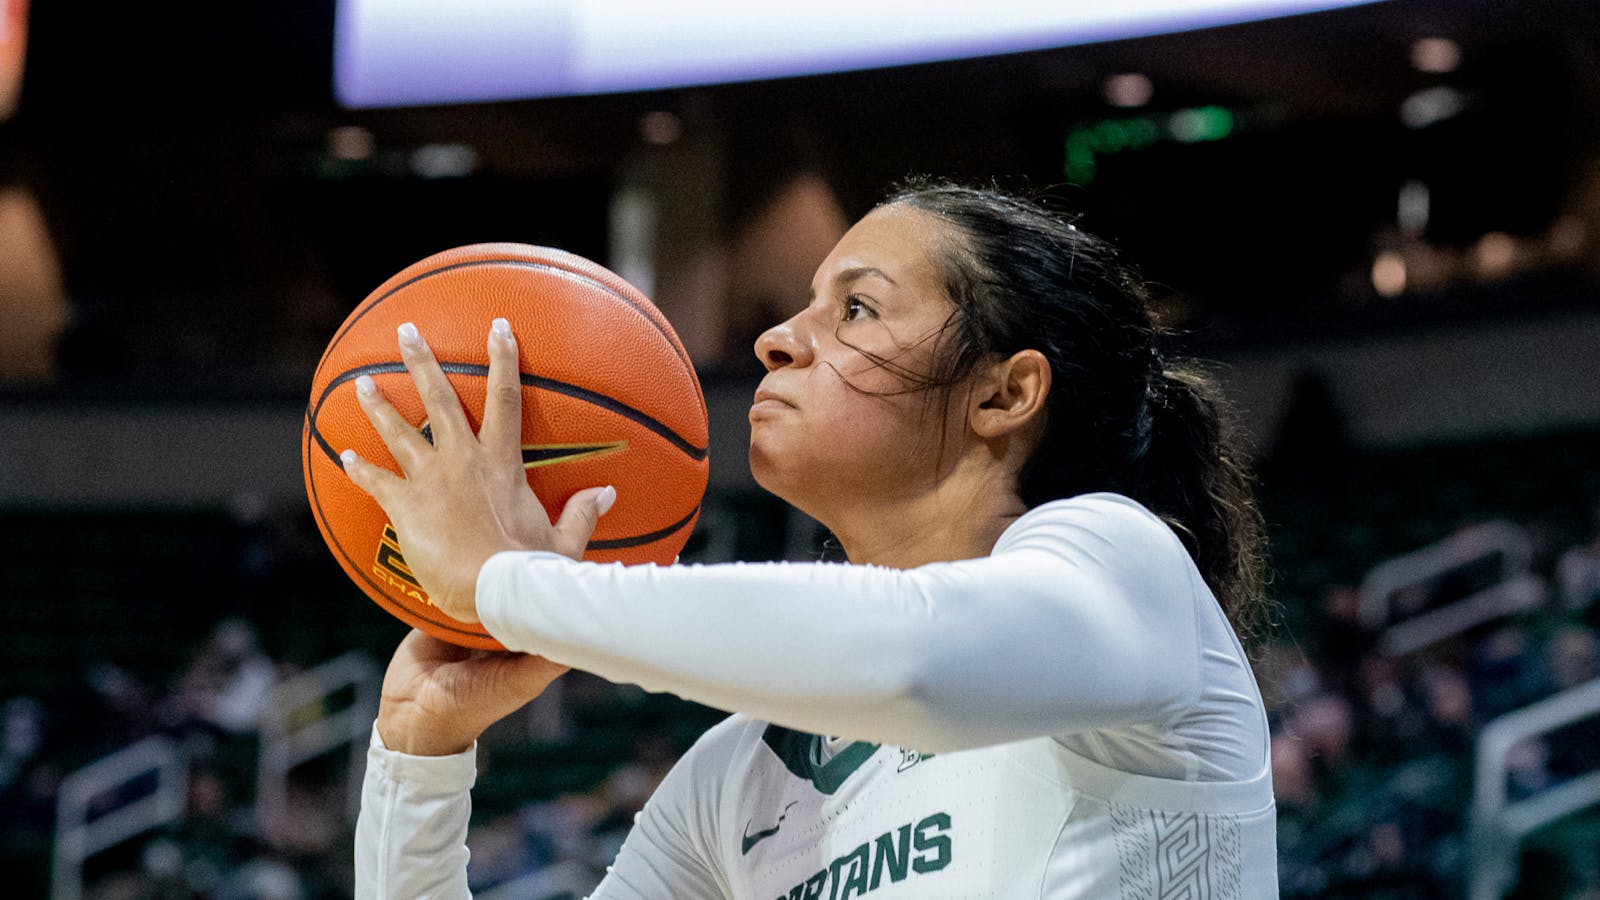 Michigan State women's basketball dominates second meeting against Rutgers, win 93-57 – The State News